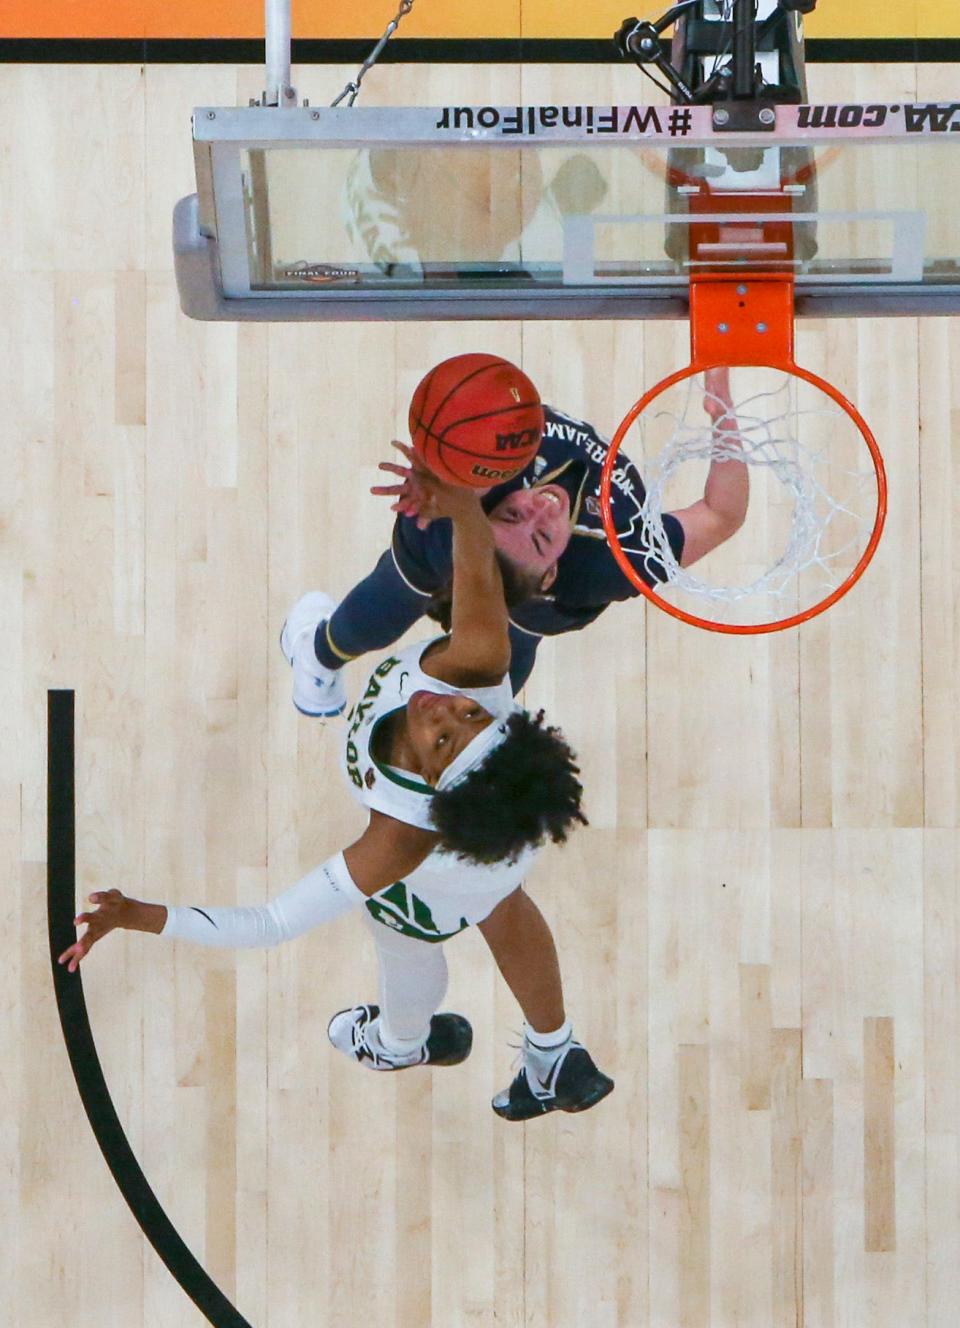 Baylor forward NaLyssa Smith, bottom, defends against Notre Dame forward Jessica Shepard during the second half of the Final Four championship game of the NCAA women's college basketball tournament Sunday, April 7, 2019, in Tampa, Fla. (Dirk Shadd/Tampa Bay Times via AP)